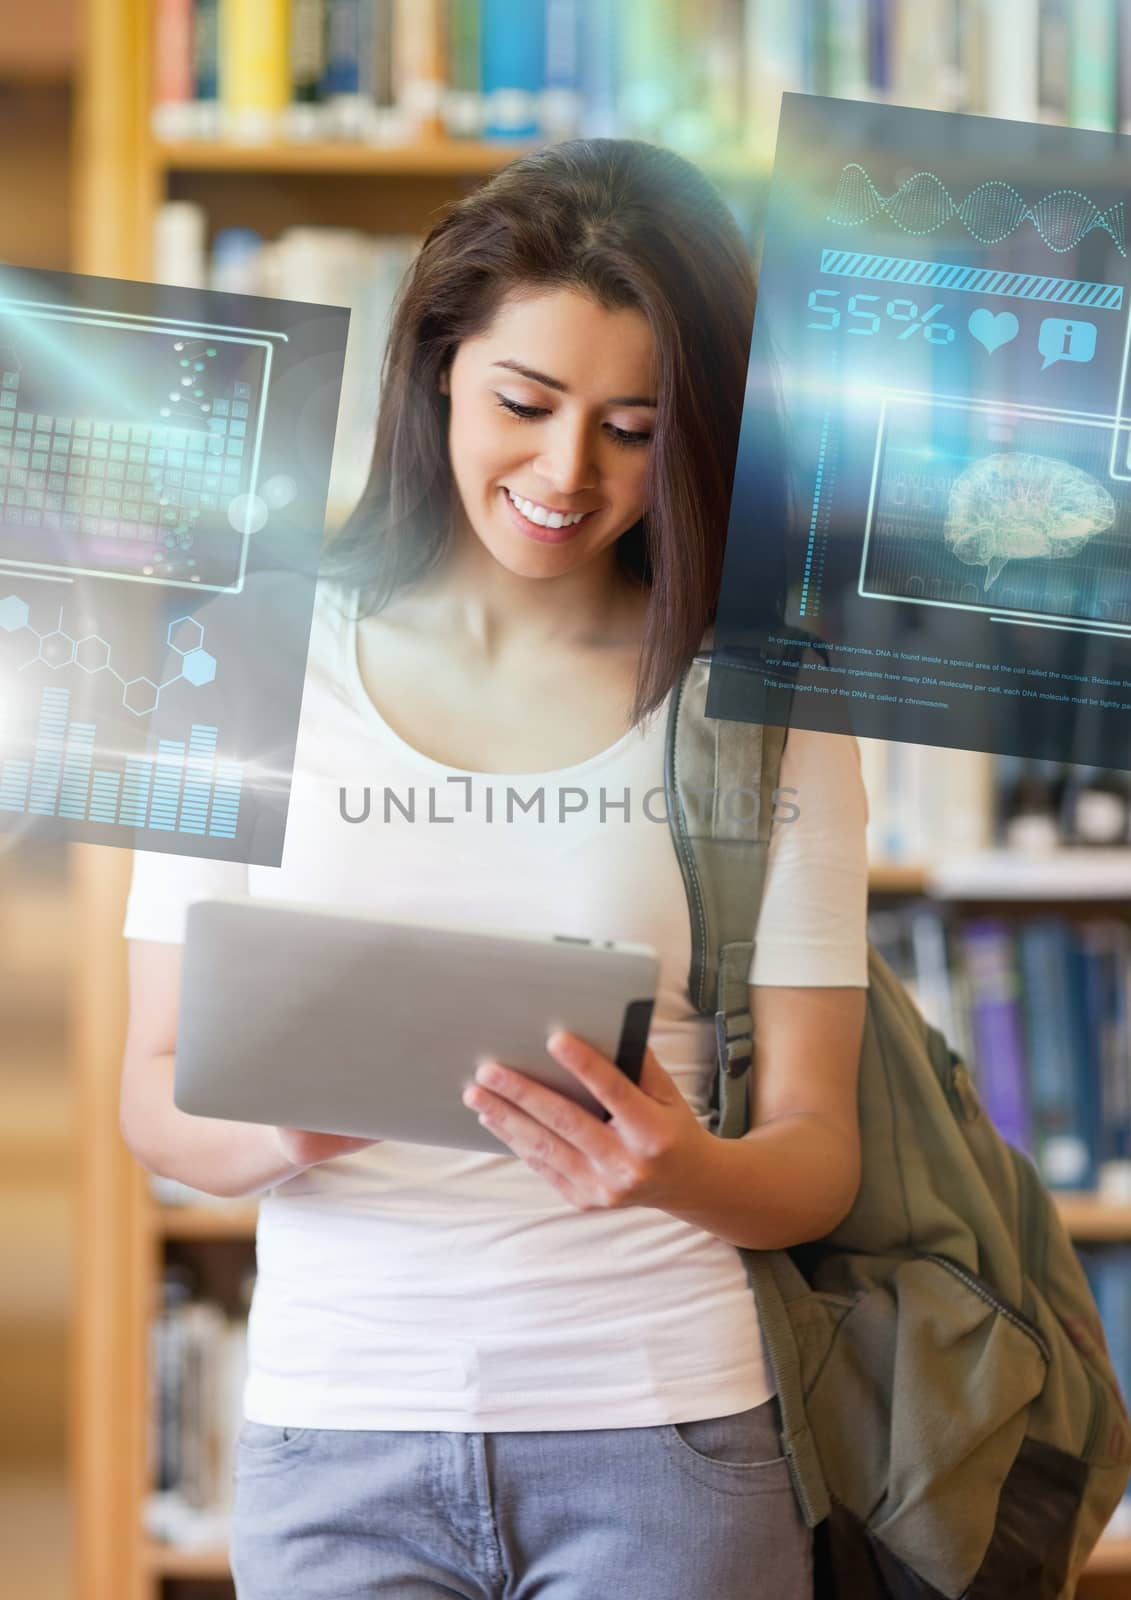 Female Student studying with tablet and science education interface graphics overlay by Wavebreakmedia